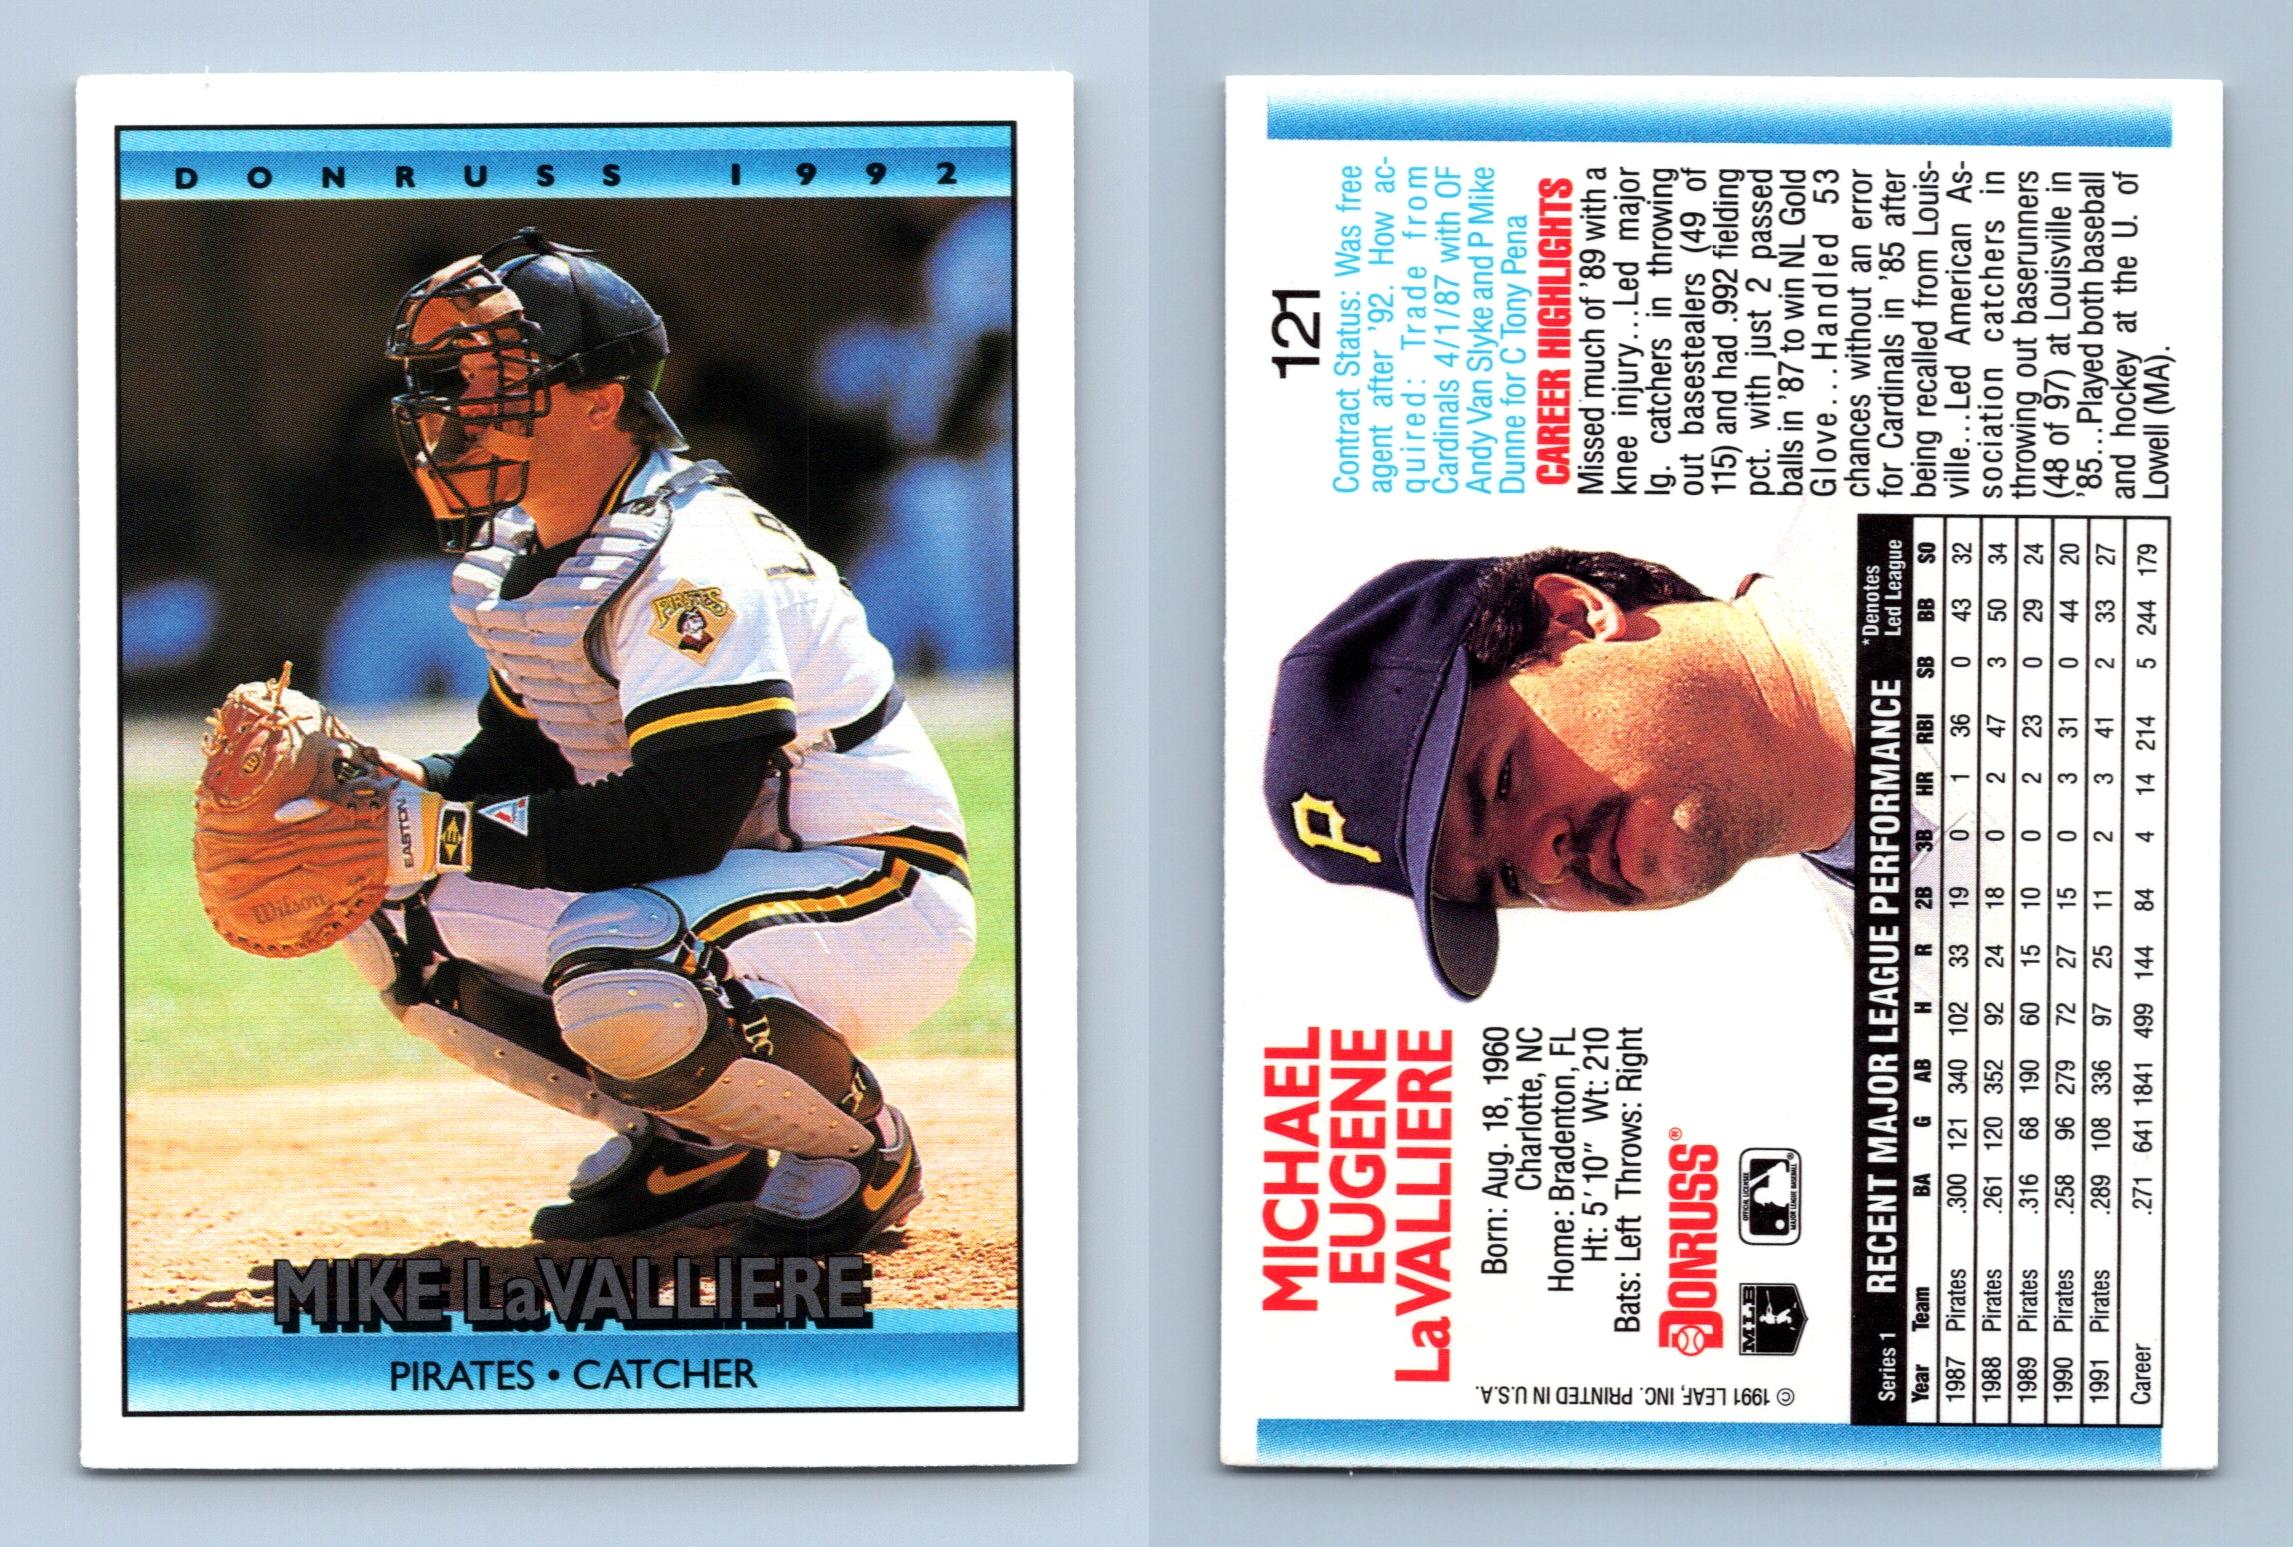 Mike LaValliere - Pirates #121 Donruss 1992 Baseball Trading Card